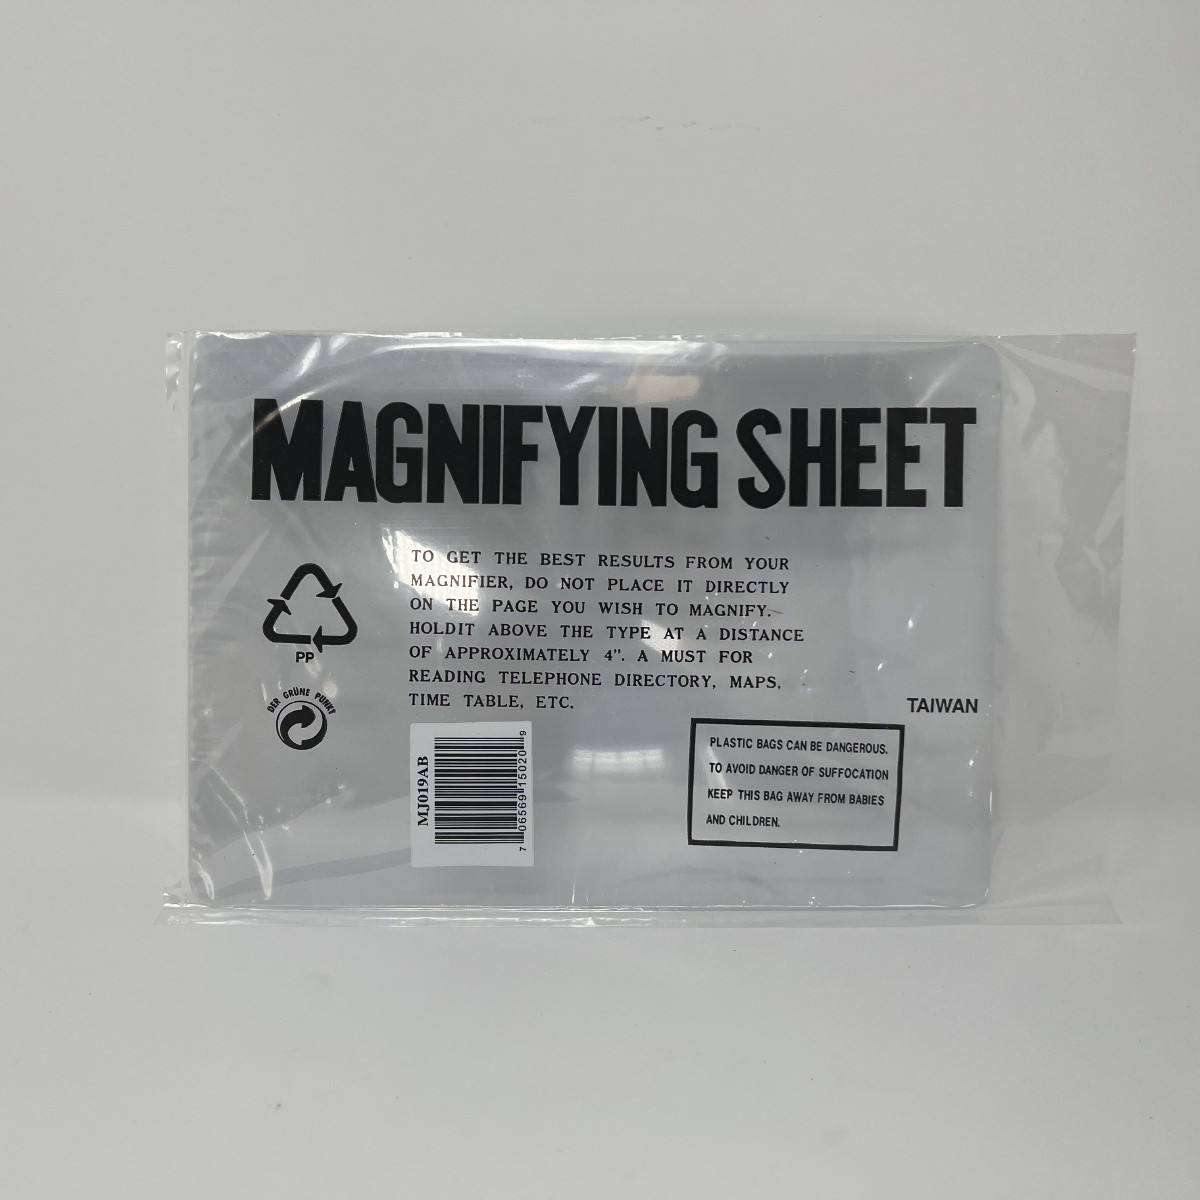 Larger picture of our Full-Page Magnifying Sheet